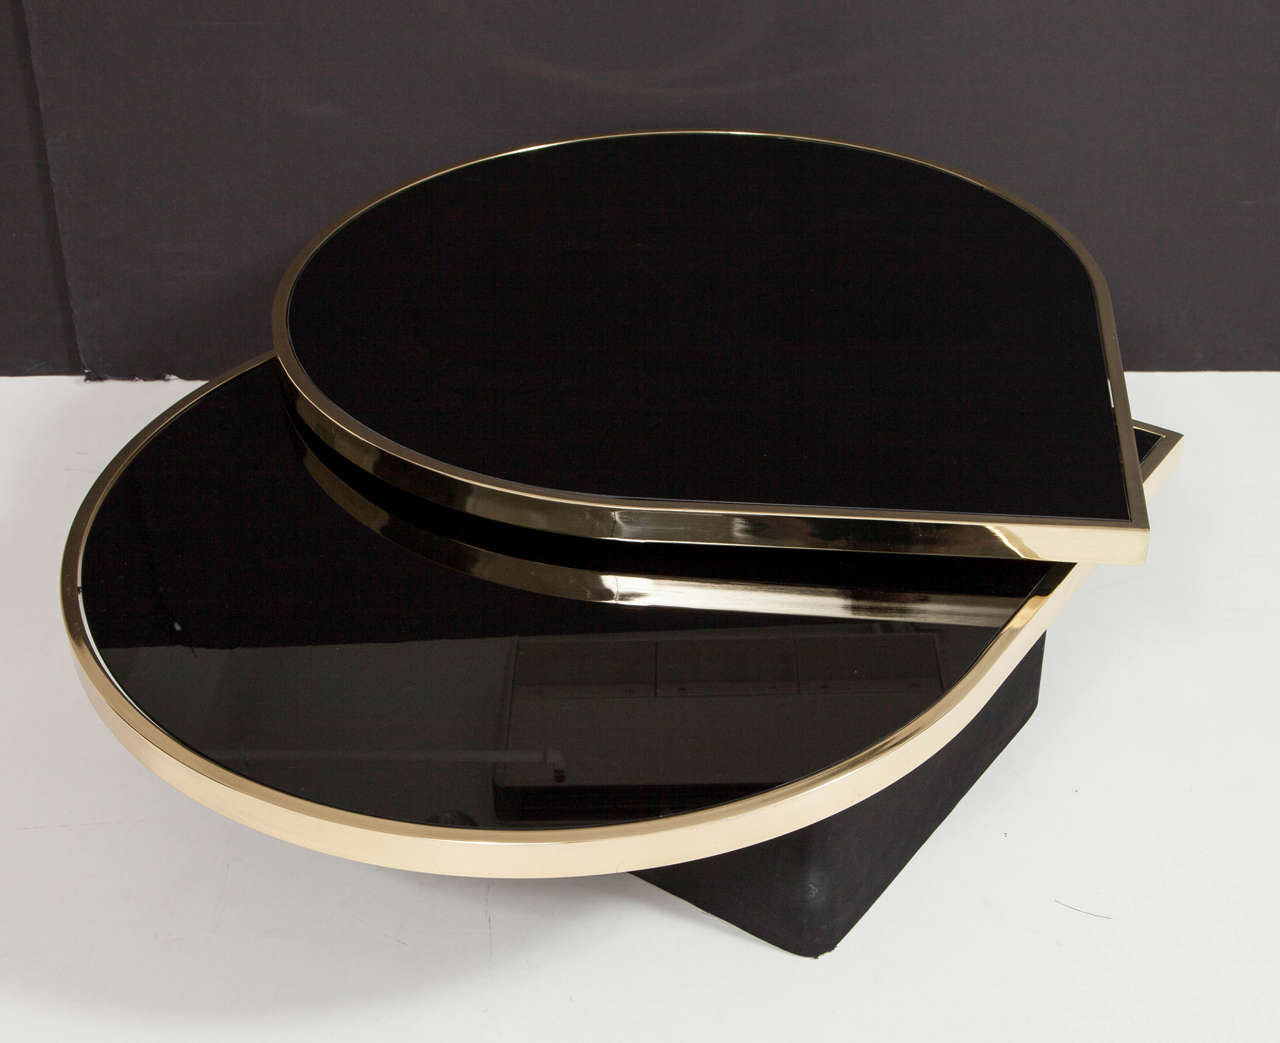 Elegant reverse black painted glass and polished brass cocktail or coffee table floating on a black suede covered base designed and manufactured by Design Institute of America (DIA). The top rings swivel or rotate out to form multiple